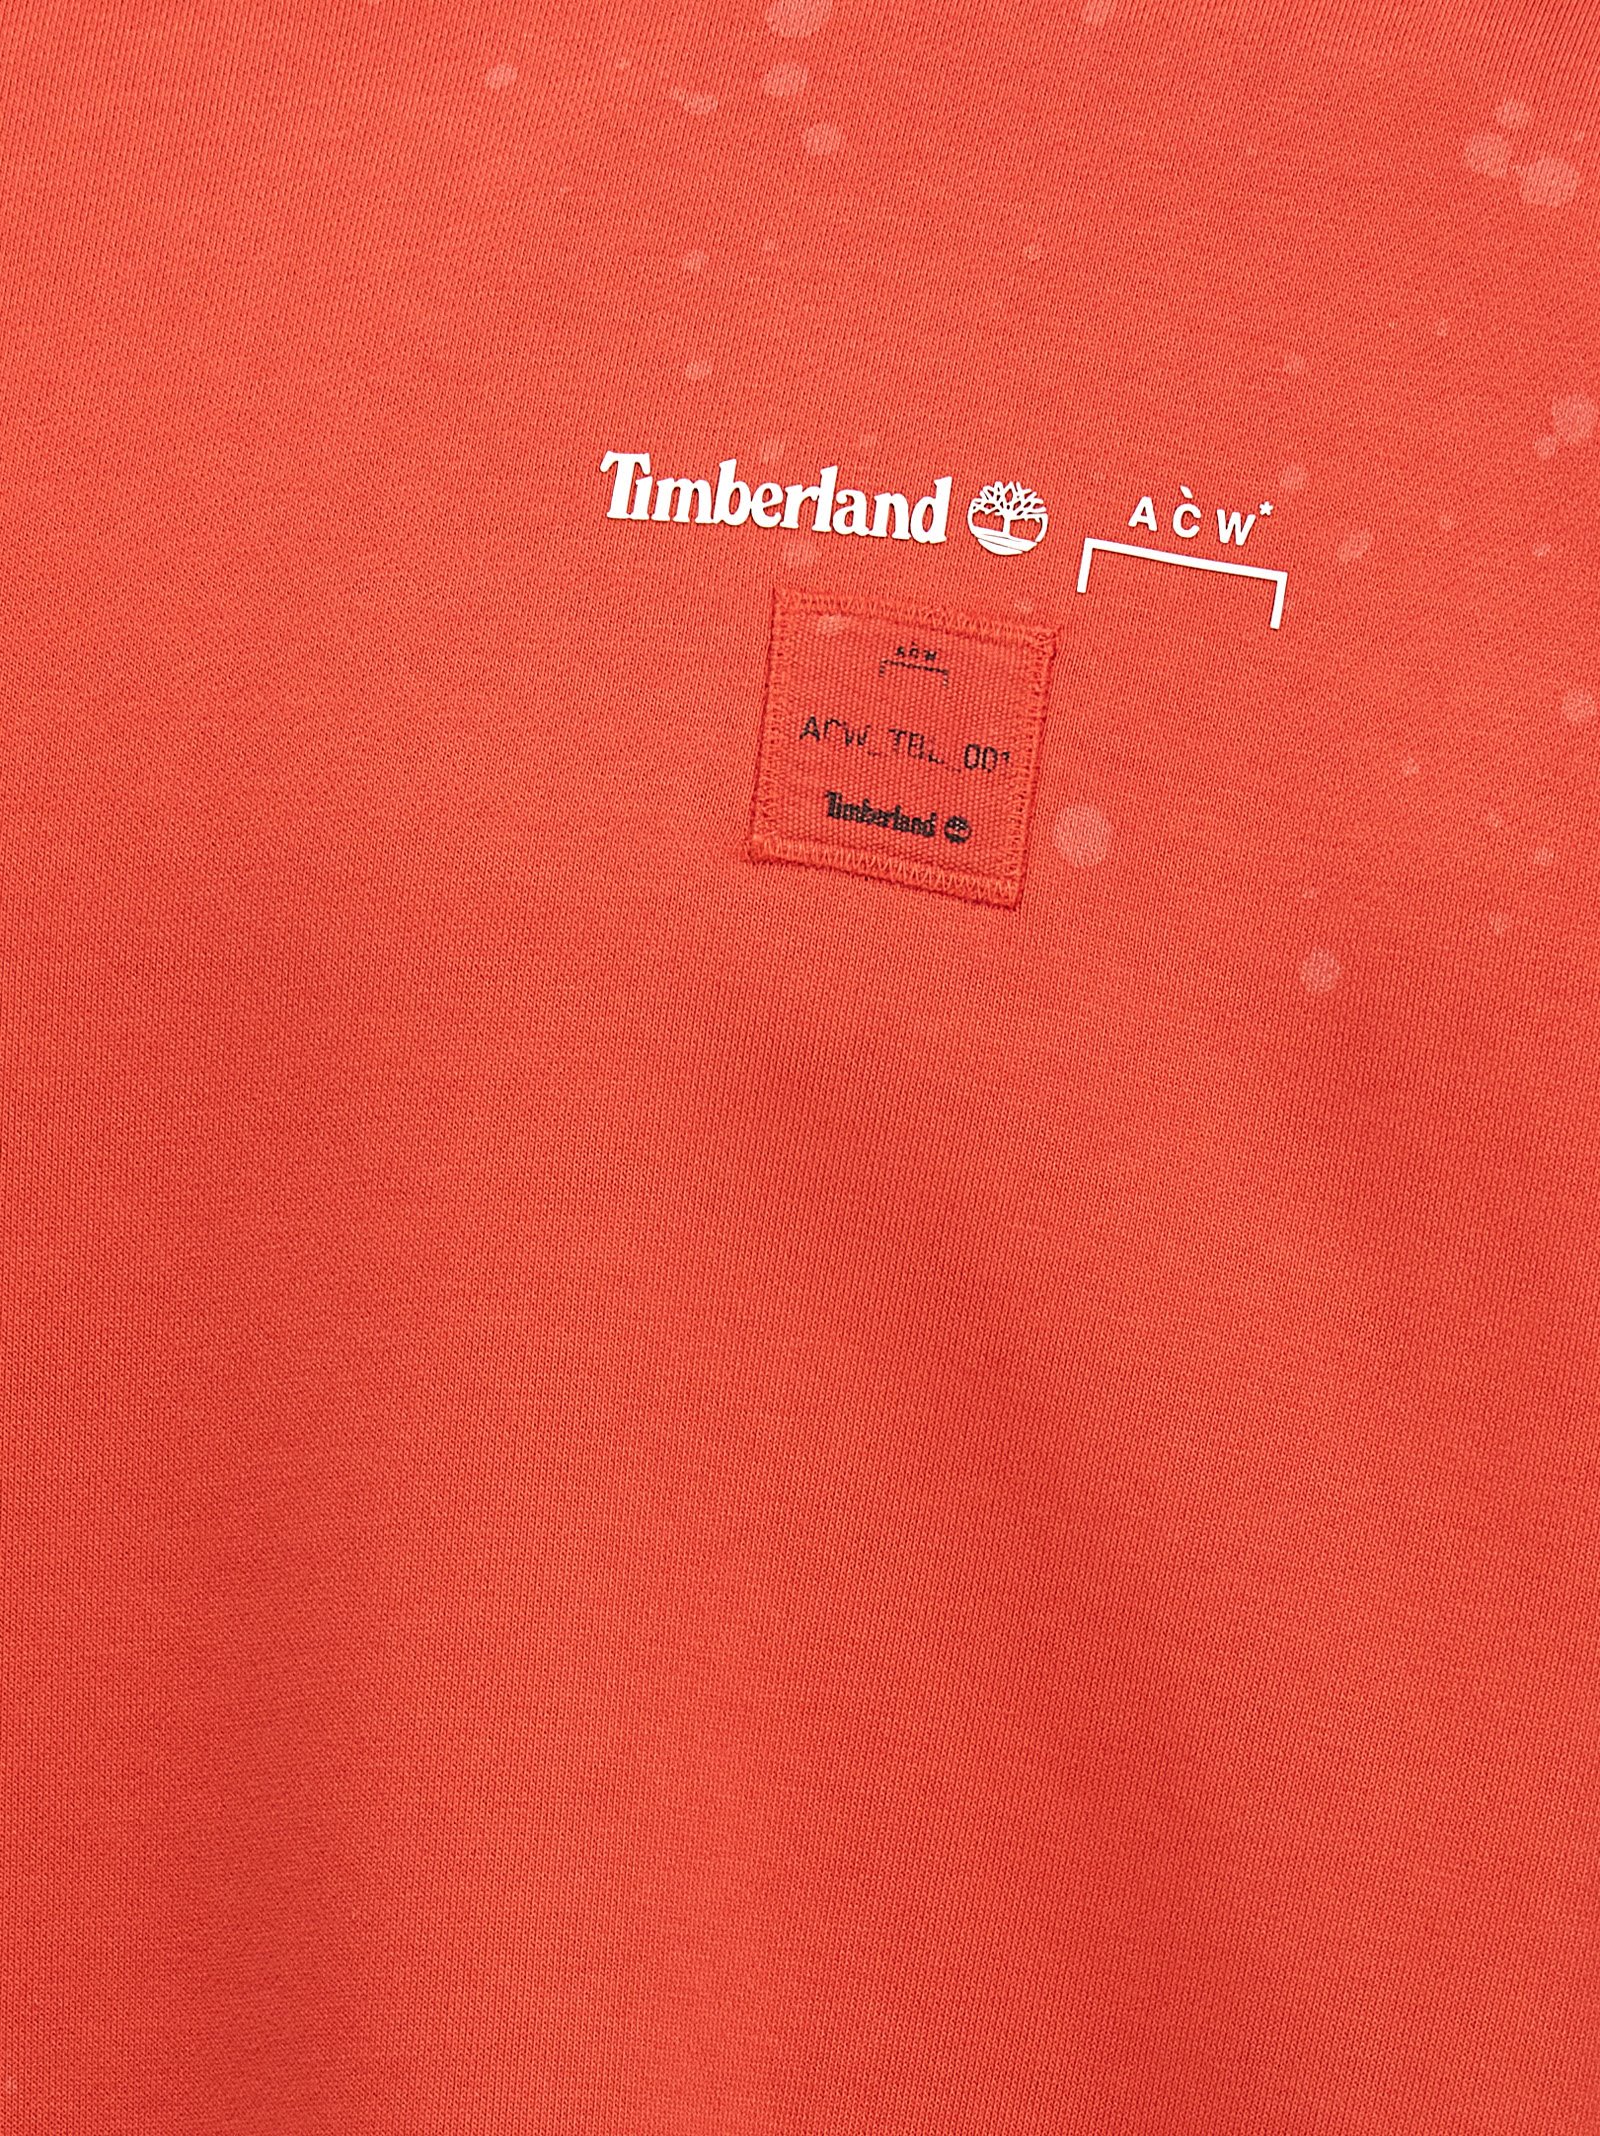 Shop A-cold-wall* Timberland  Capsule Sweatshirt In Red